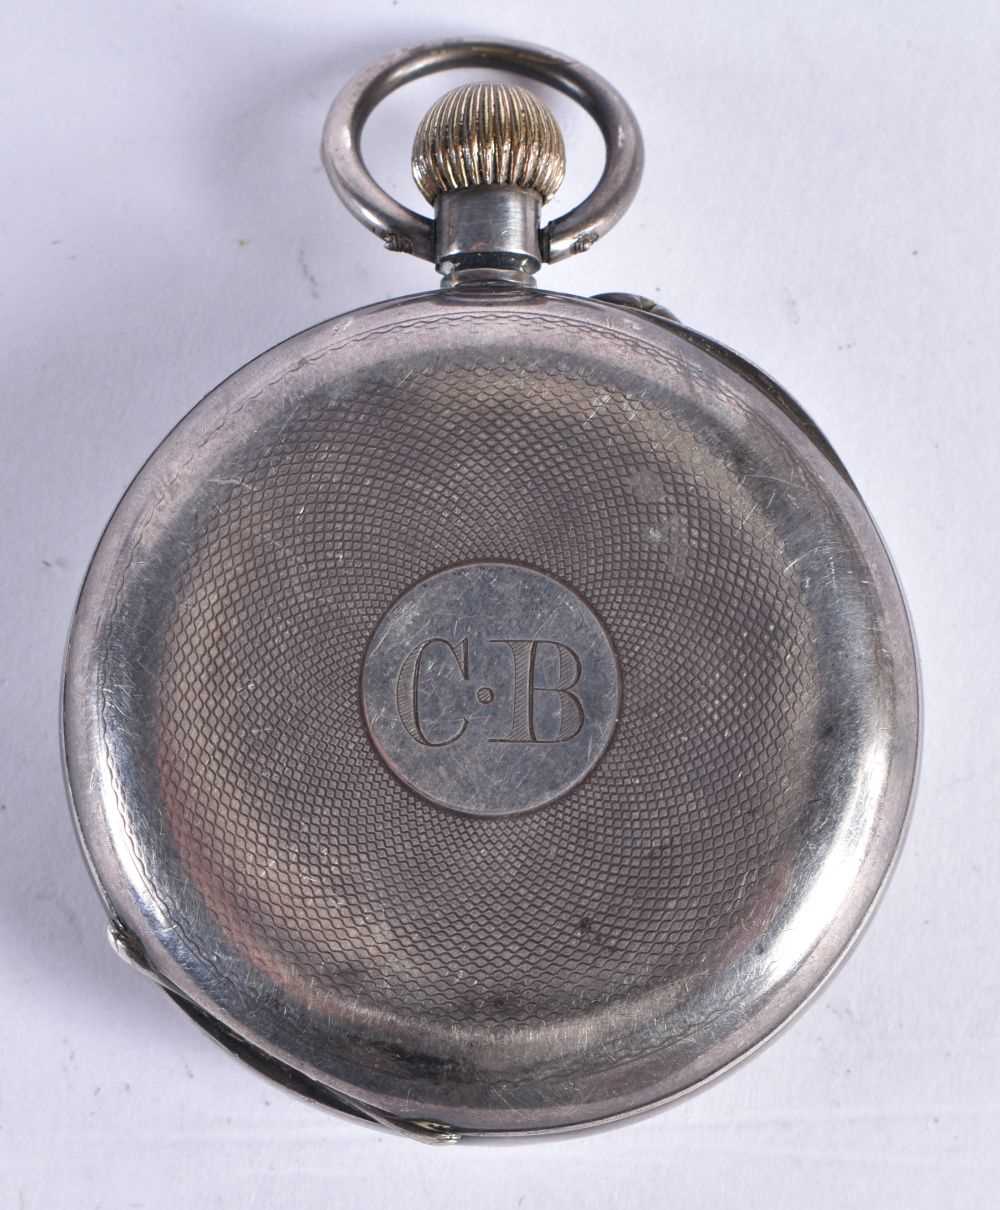 Vintage Silver Gents Open Face Pocket Watch.  Stamped 935. Movement - Hand-wind.  WORKING - Tested - Image 5 of 5